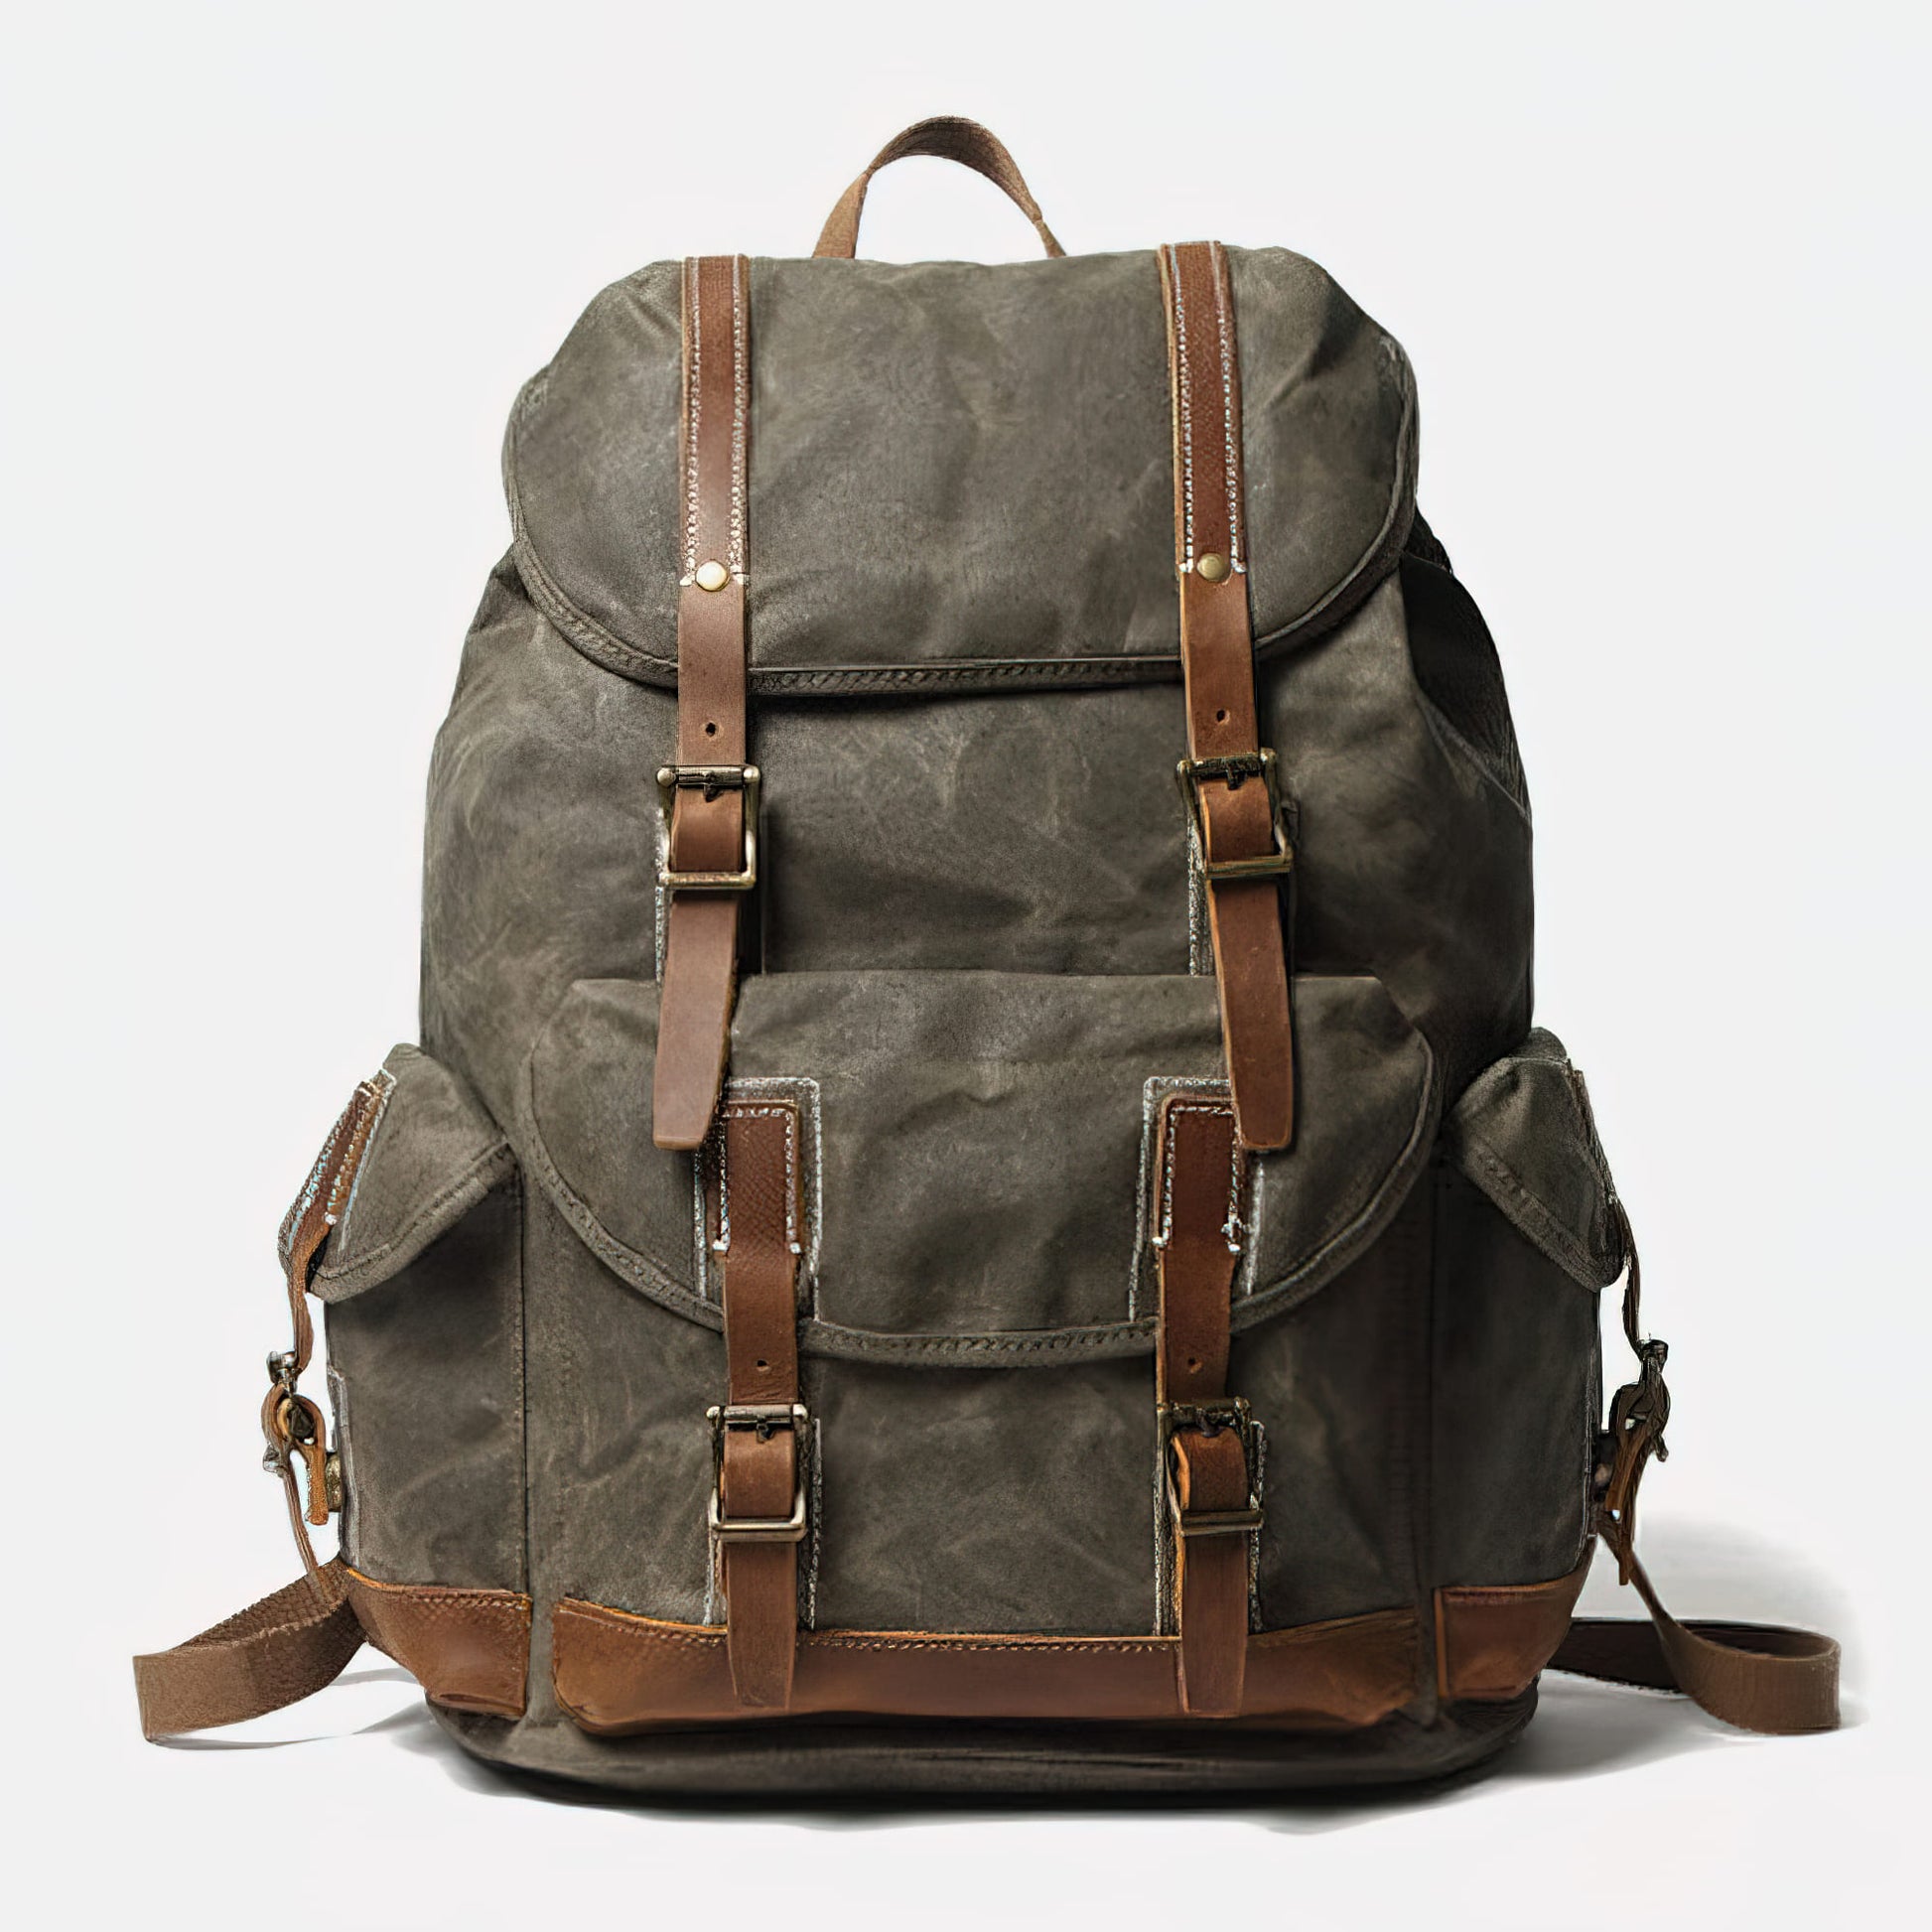 The Basic Canvas School Backpack